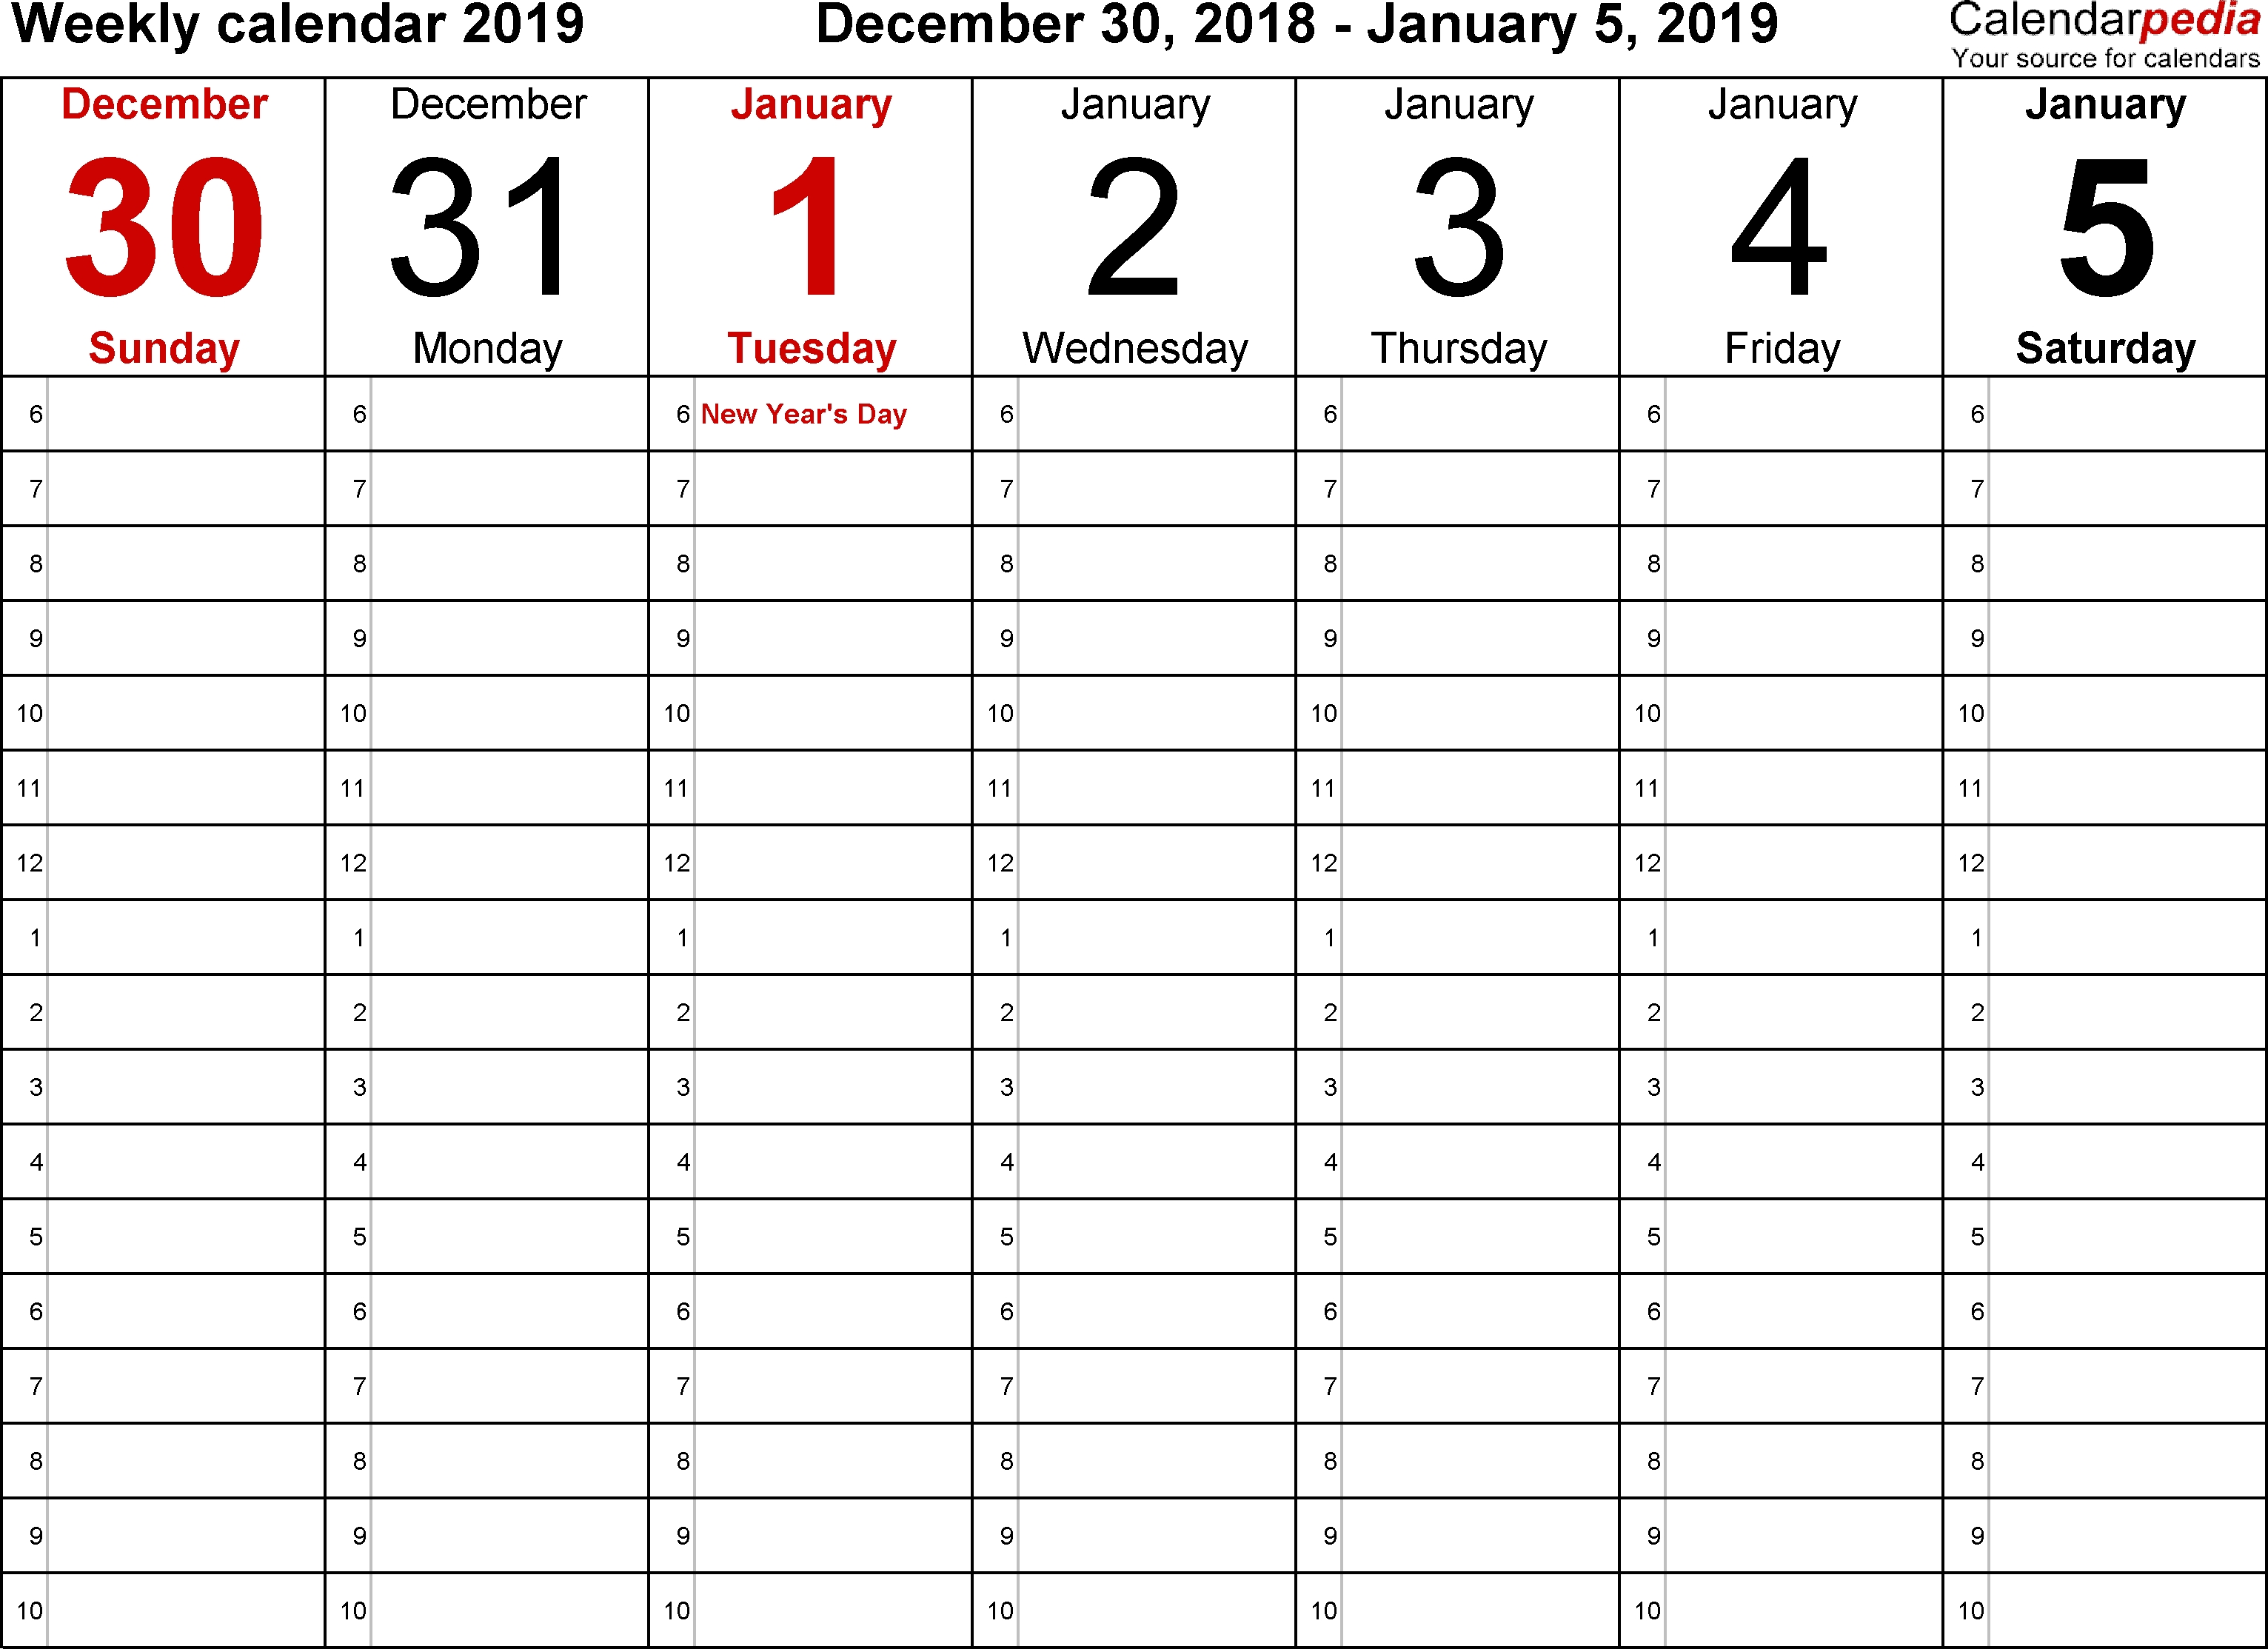 Weekly Calendar 2019 For Word - 12 Free Printable Templates throughout 7 Day Time Weekly Planner